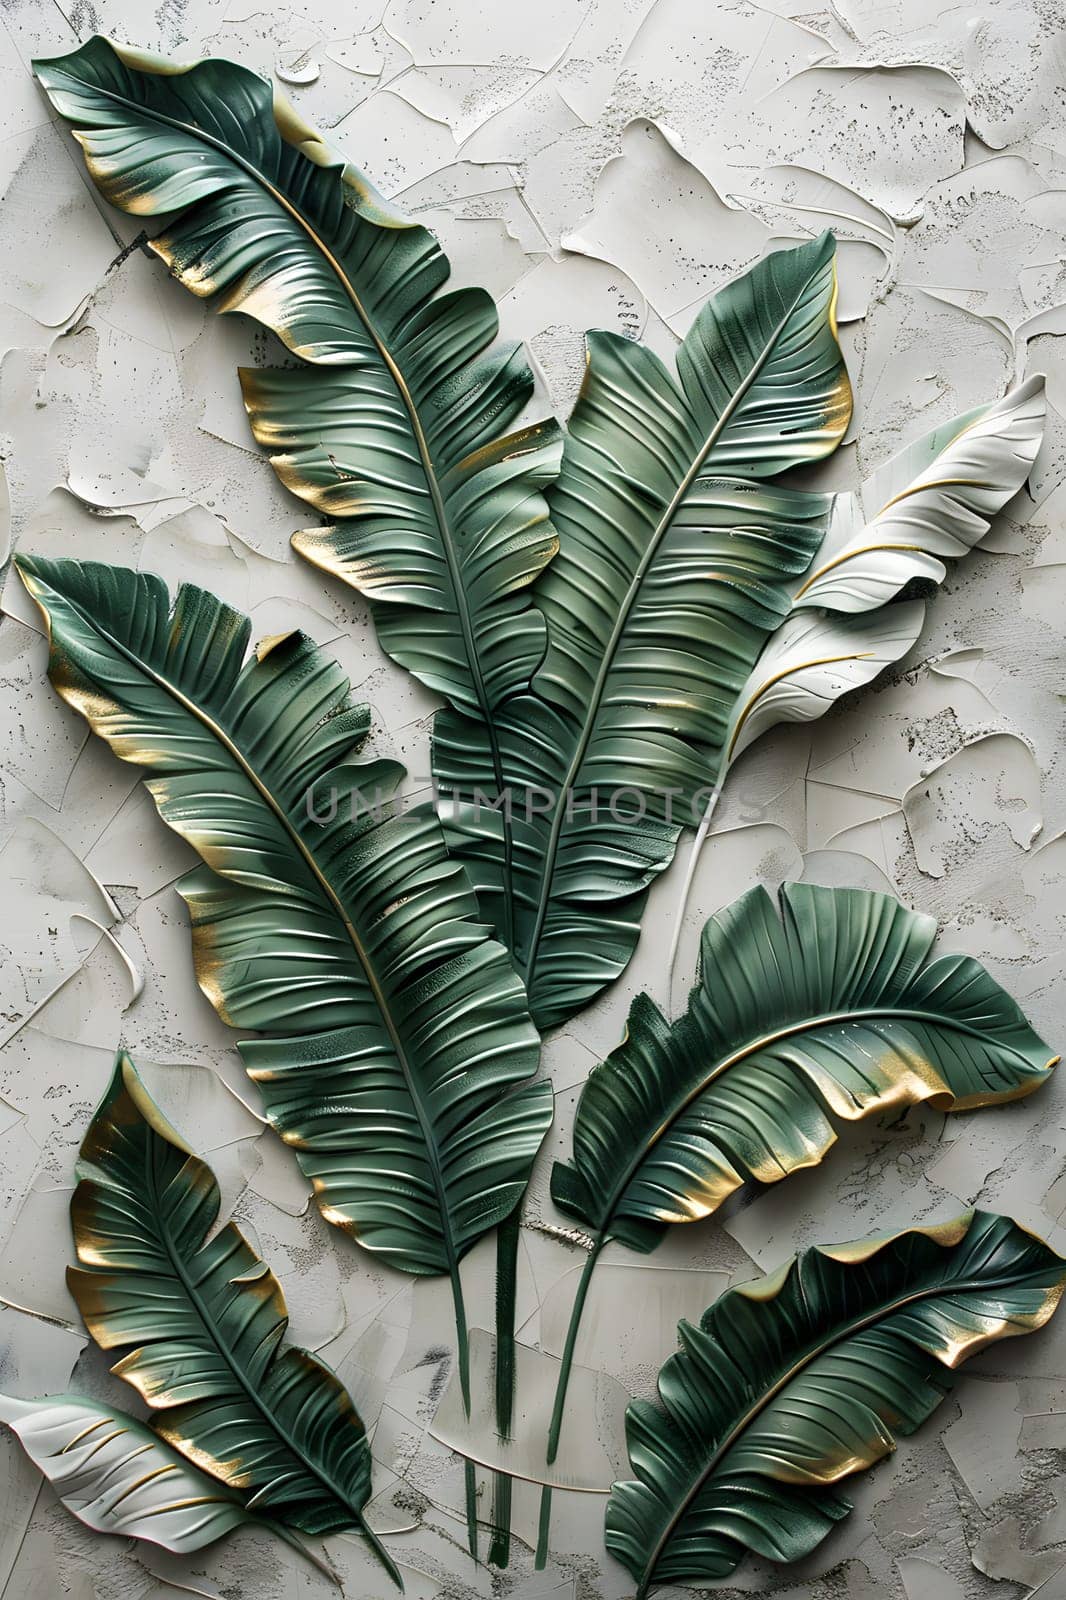 A painting of green and gold banana leaves on a wall by Nadtochiy